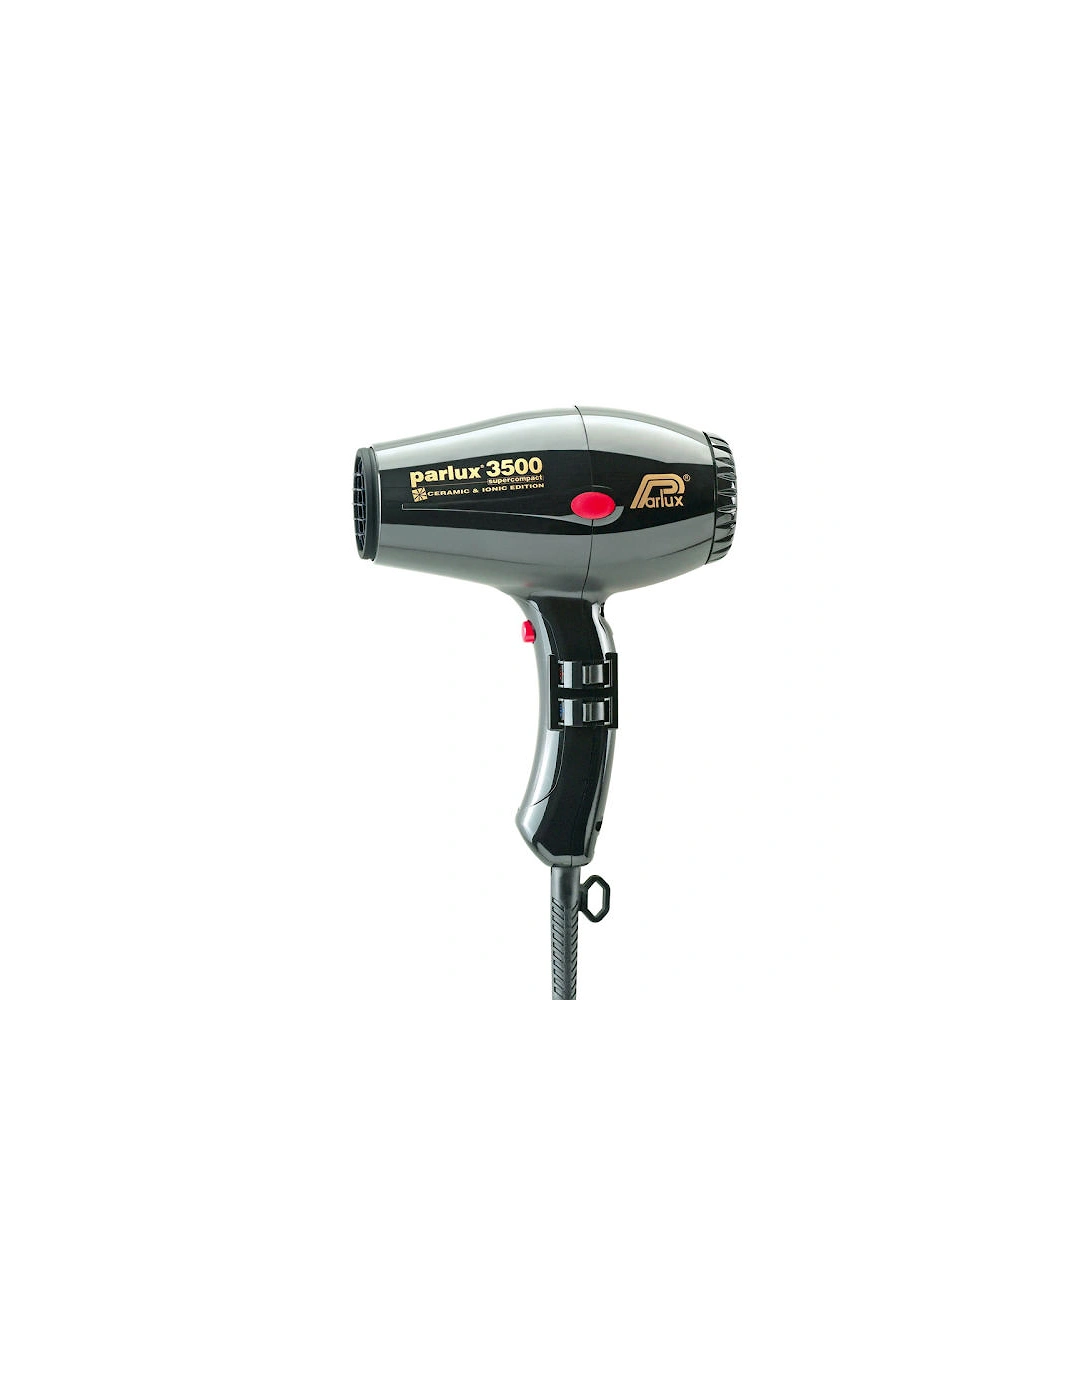 3500 Super Compact Ionic Hair Dryer - Black - Parlux, 2 of 1